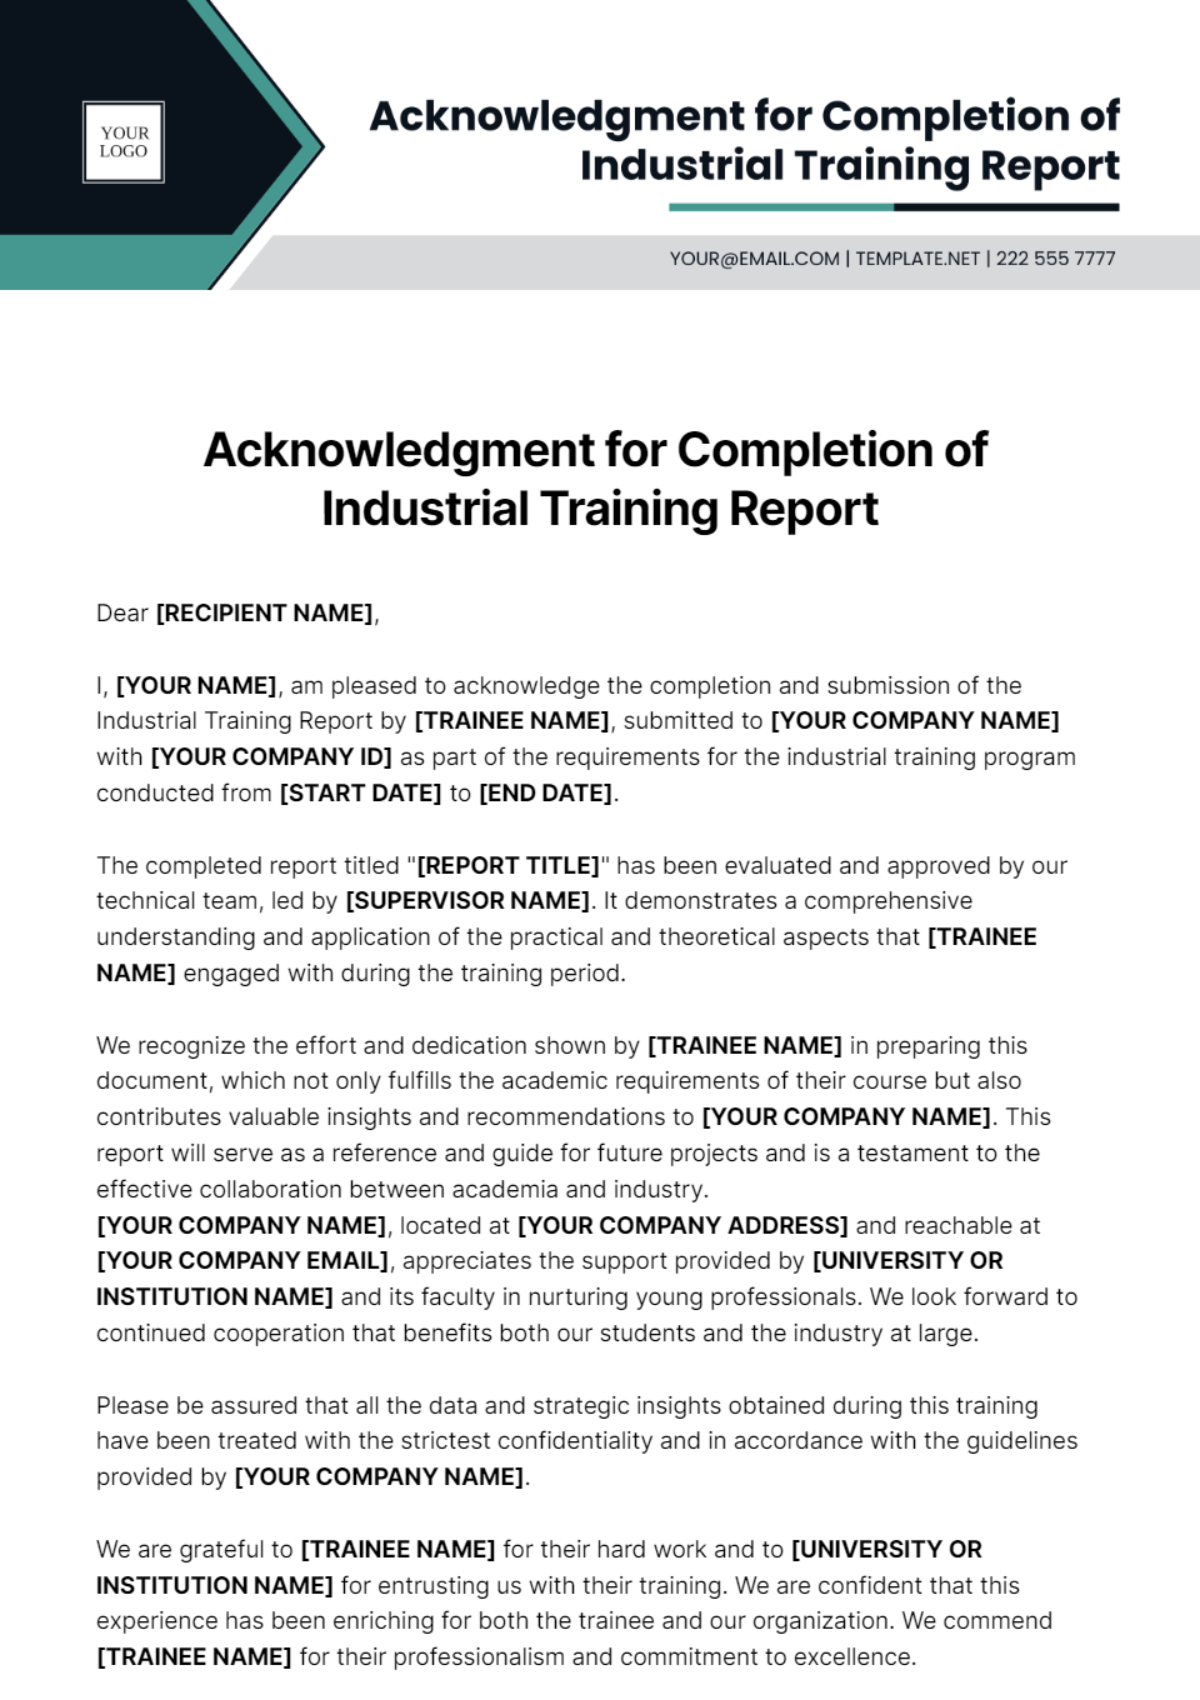 Acknowledgment For Industrial Training Report Template